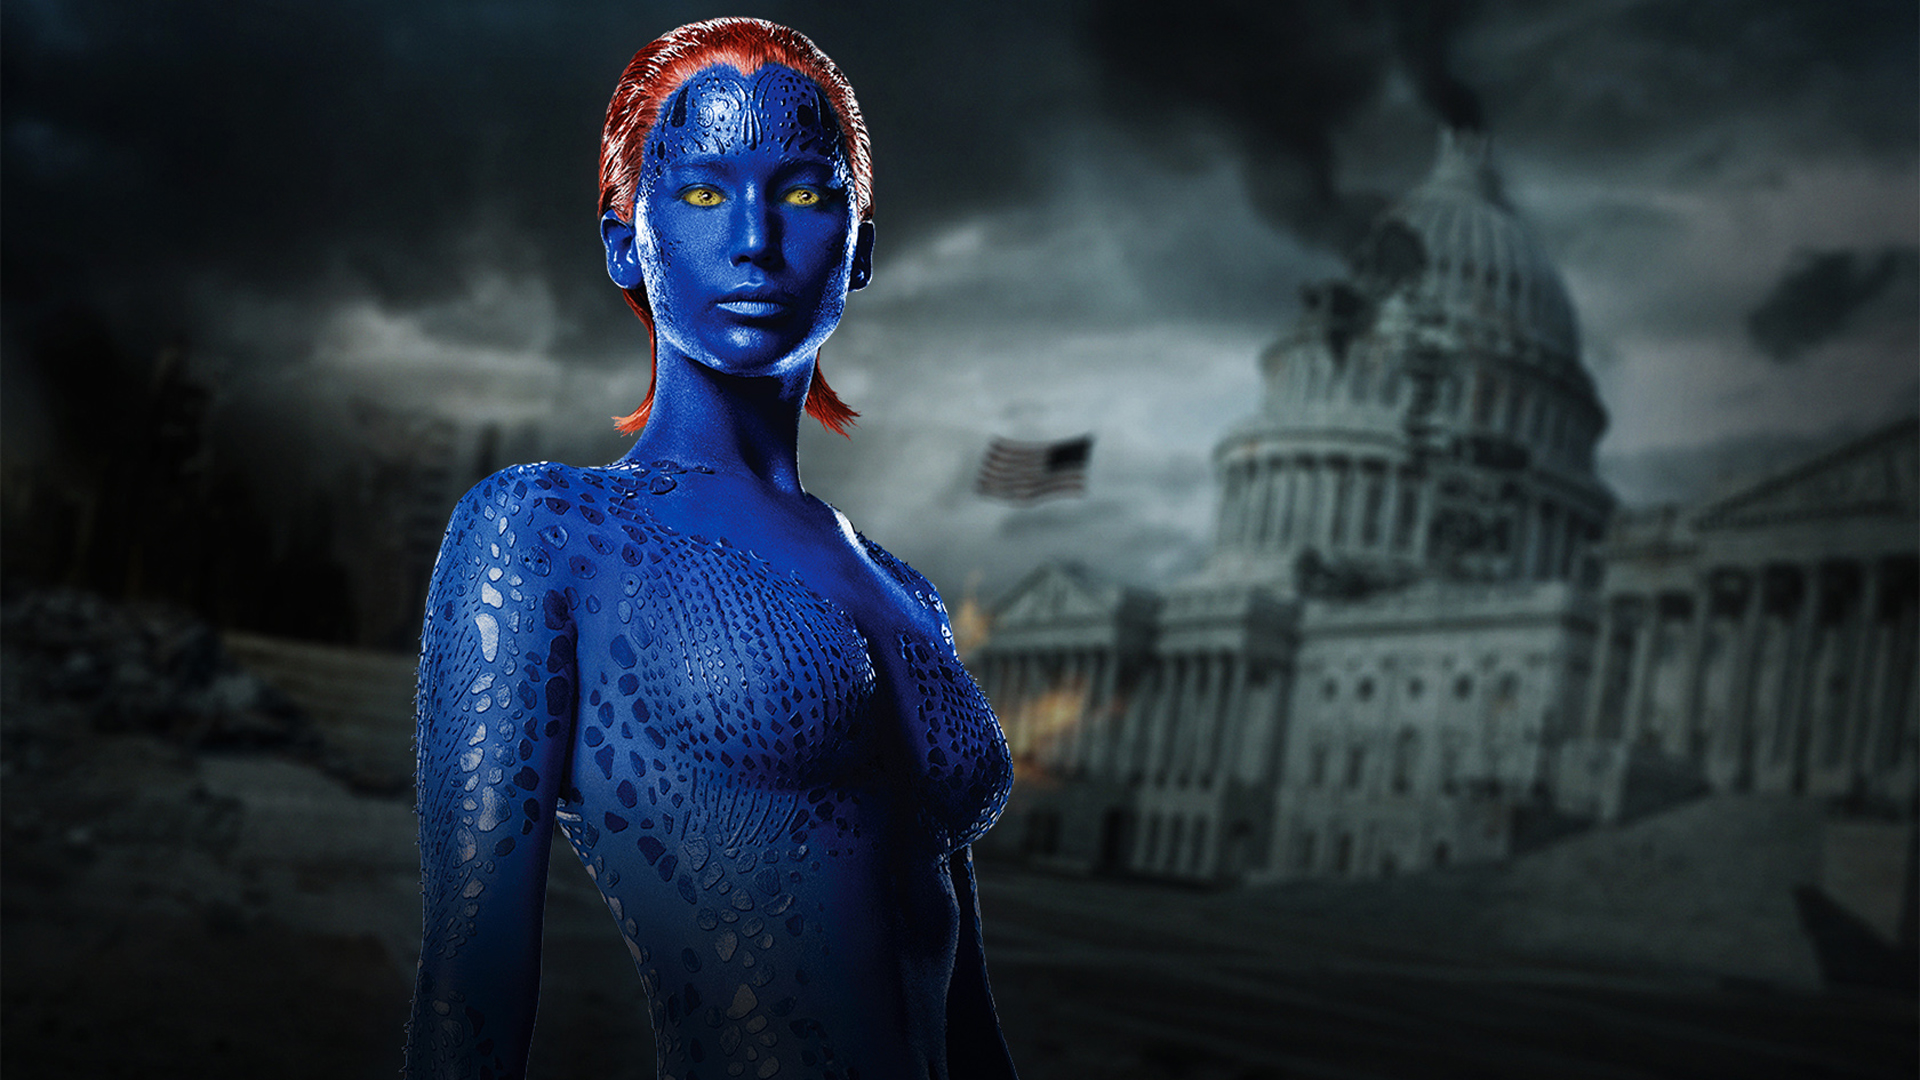 Watch X-Men: Days of Future Past full movie online free on